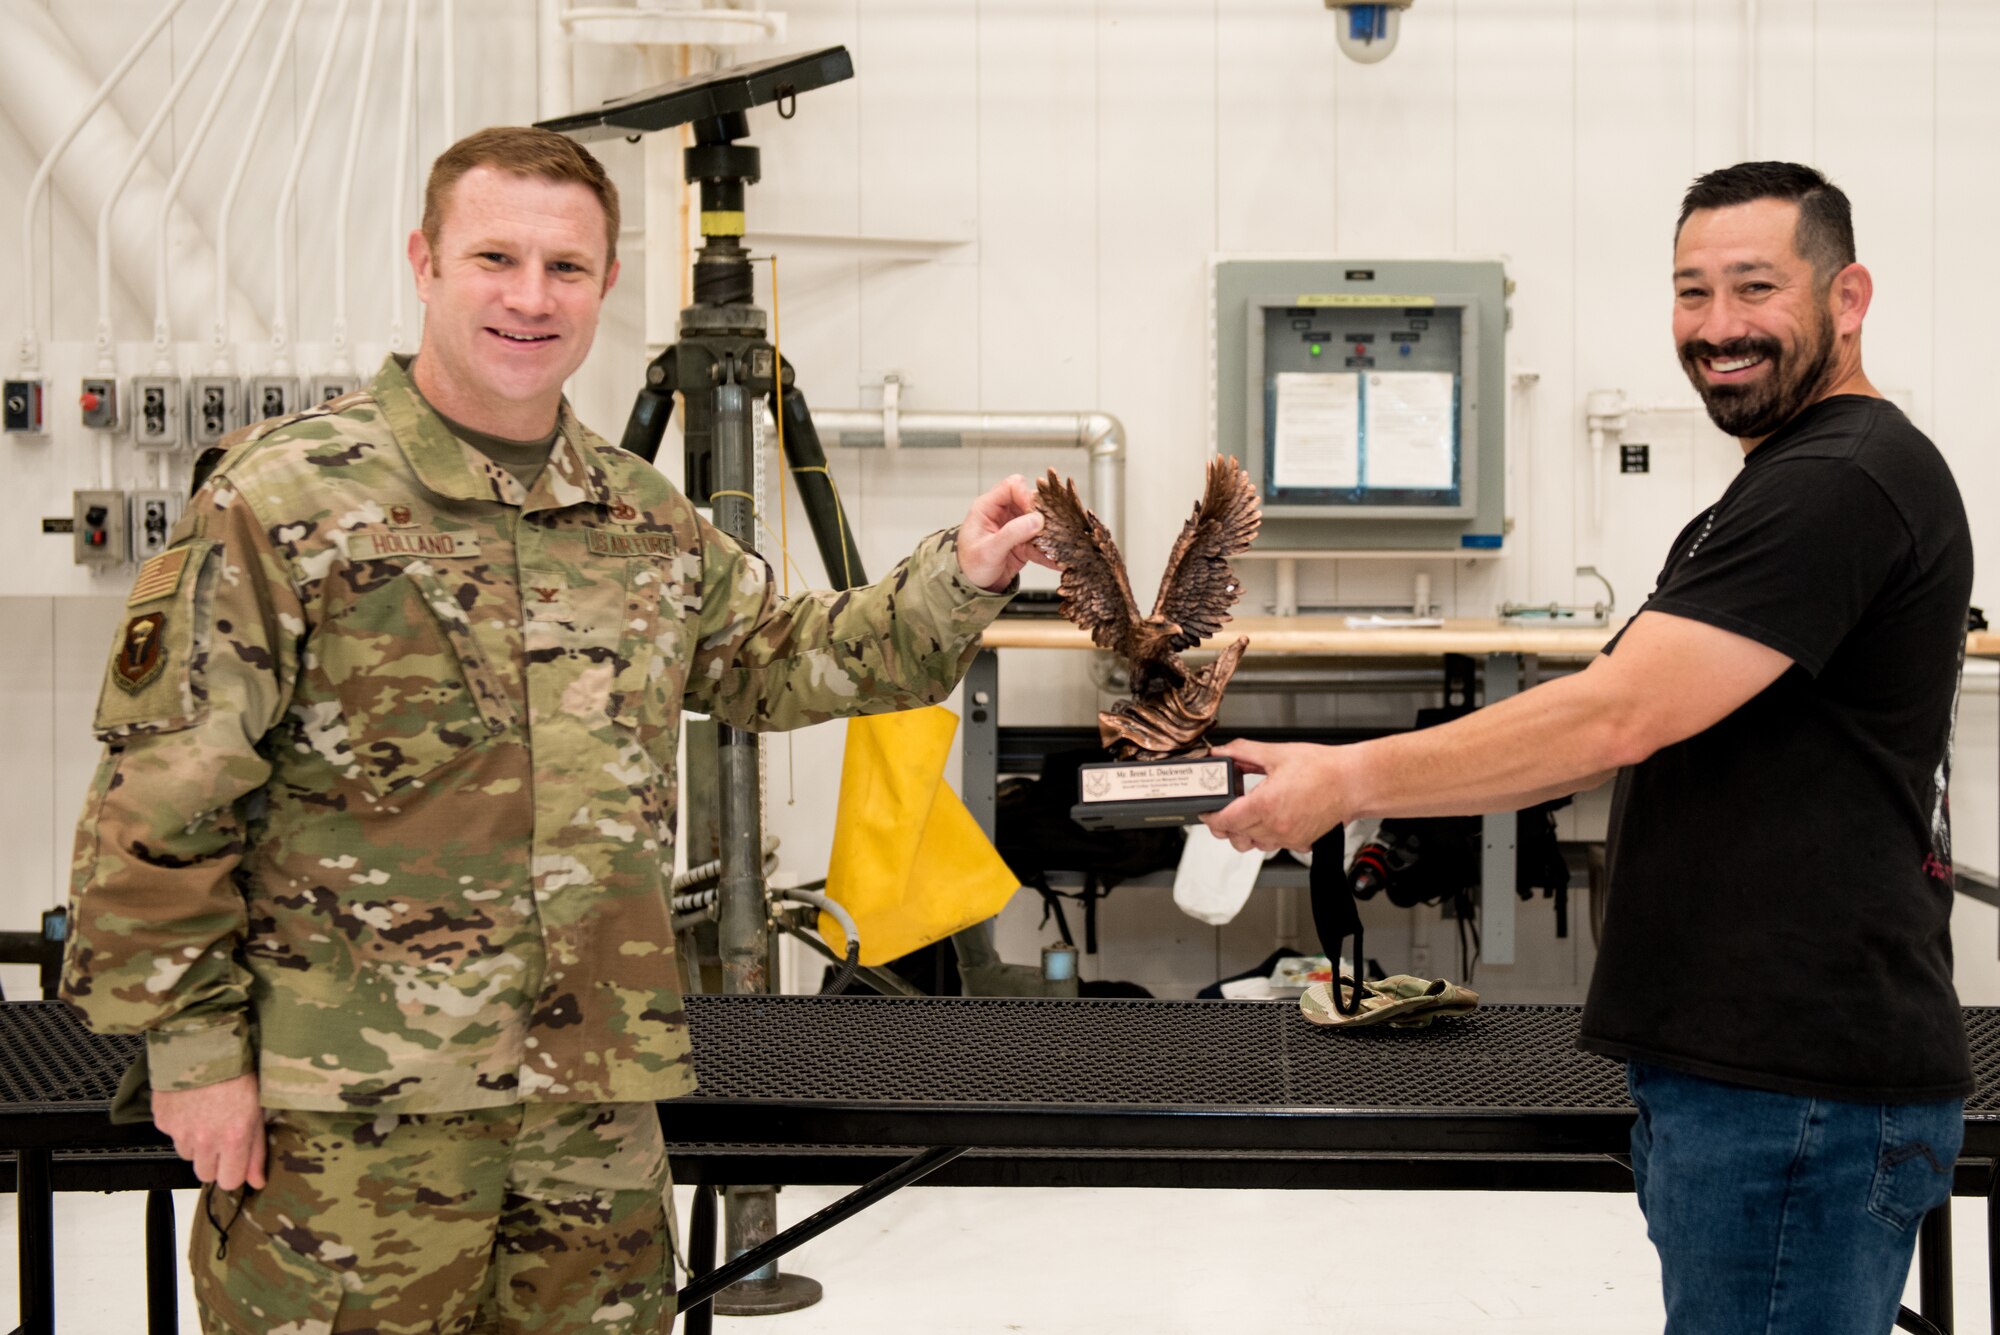 U.S. Air Force Col. Jeffrey Holland, 509th Maintenance Group commander, left, and Brent Duckworth, 509th MXG aircraft low observable structural maintenance technician, right, stands for photo with the Lt. Gen. Leo Marquez Award at Whiteman Air Force Base, Missouri, Aug. 14, 2020. Duckworth won the award in the Civilian Technician Aircraft Maintenance Category. This award recognizes military and civil service aircraft, munitions, and missile maintenance personnel who perform hands-on maintenance or manage a maintenance function. (U.S. Air Force photo by Airman 1st Class Christina Carter)